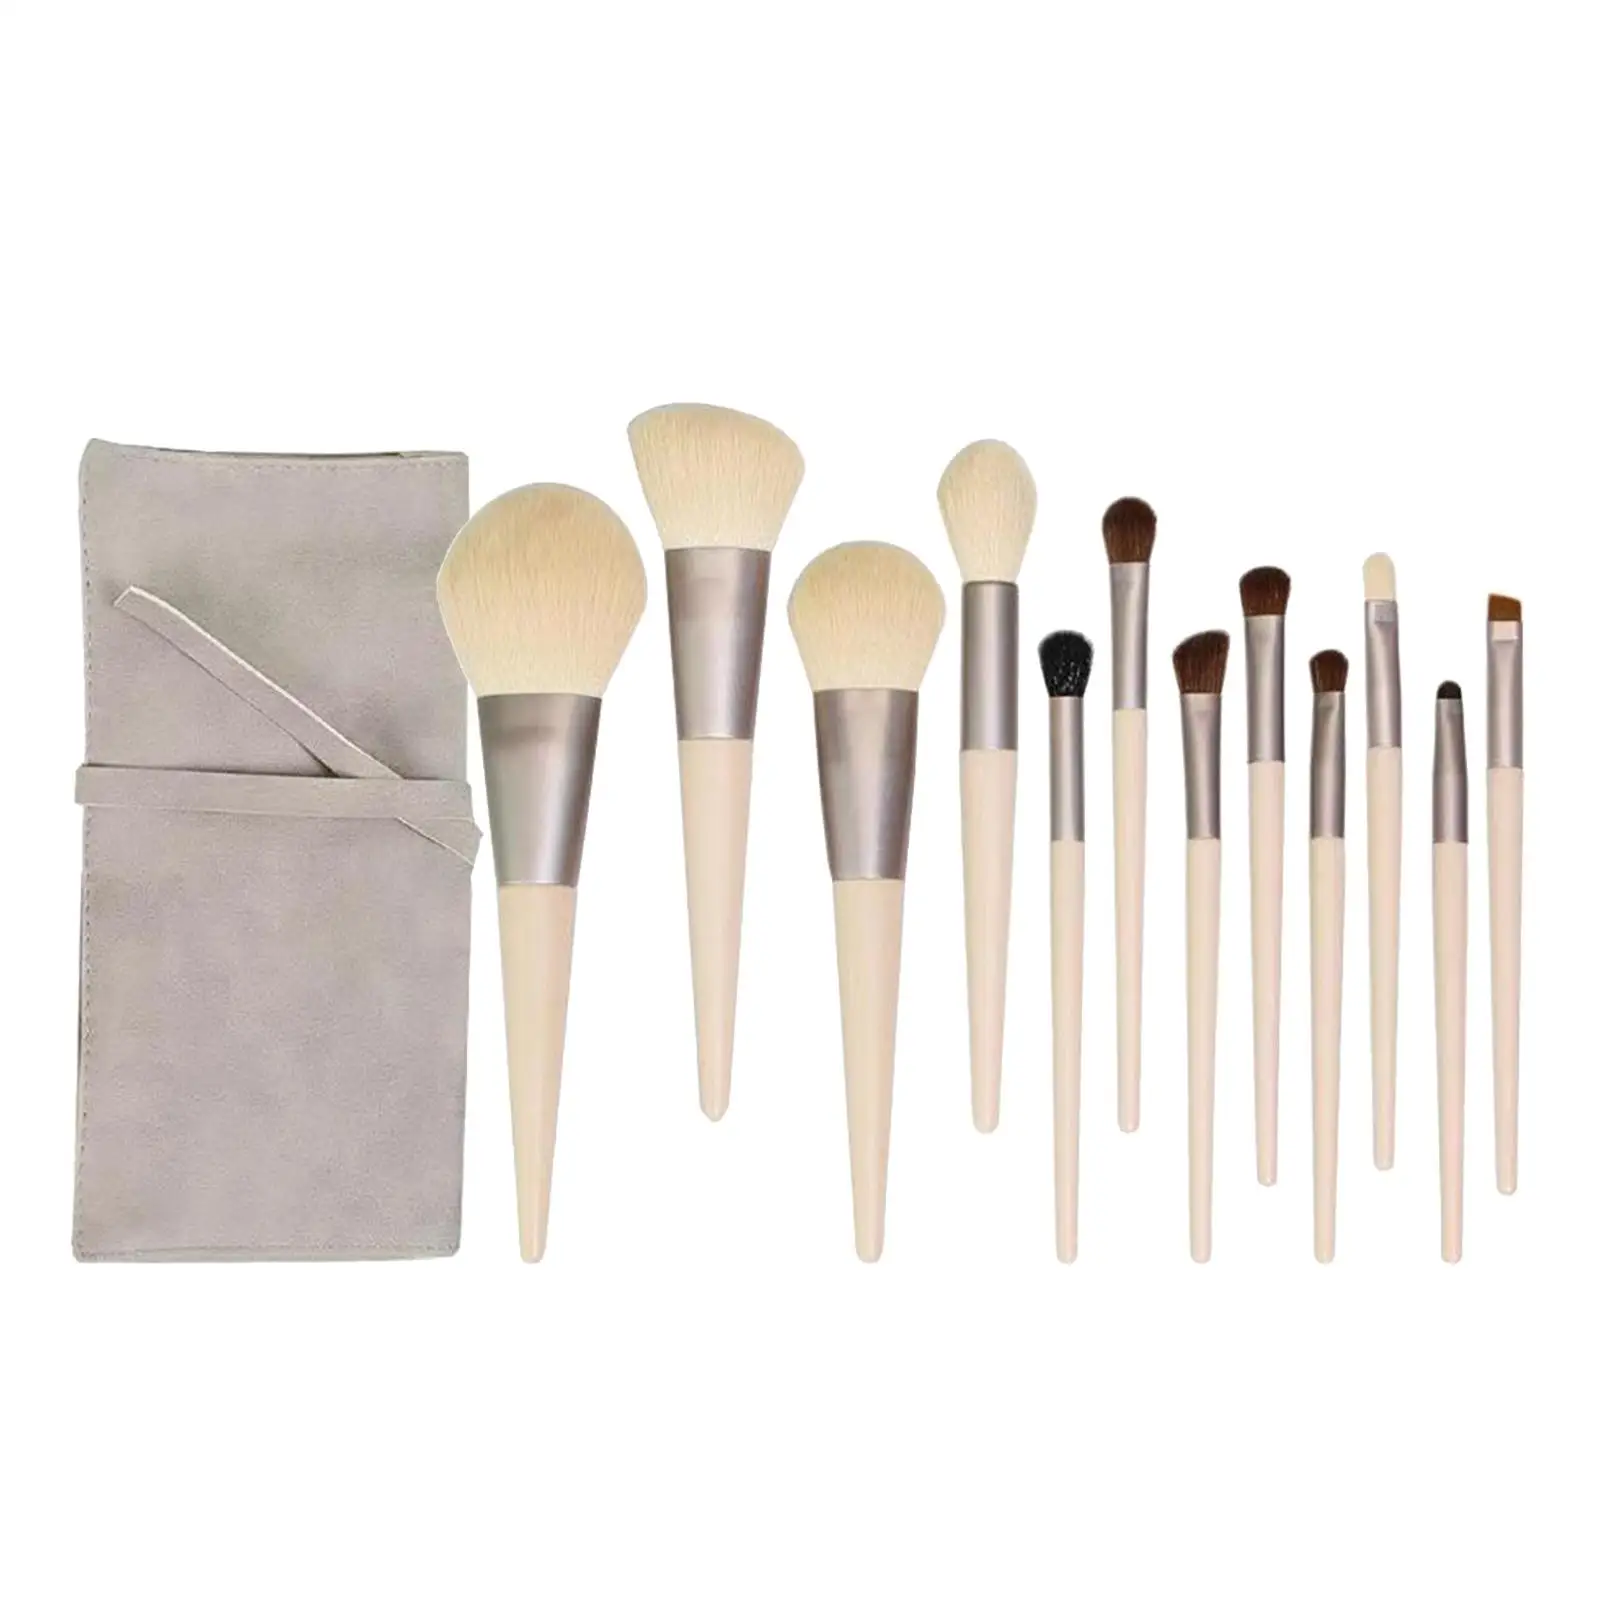 12 Pieces Makeup Brush Sets Eye Shadow Brush for Makeup Artists Mom Outdoor